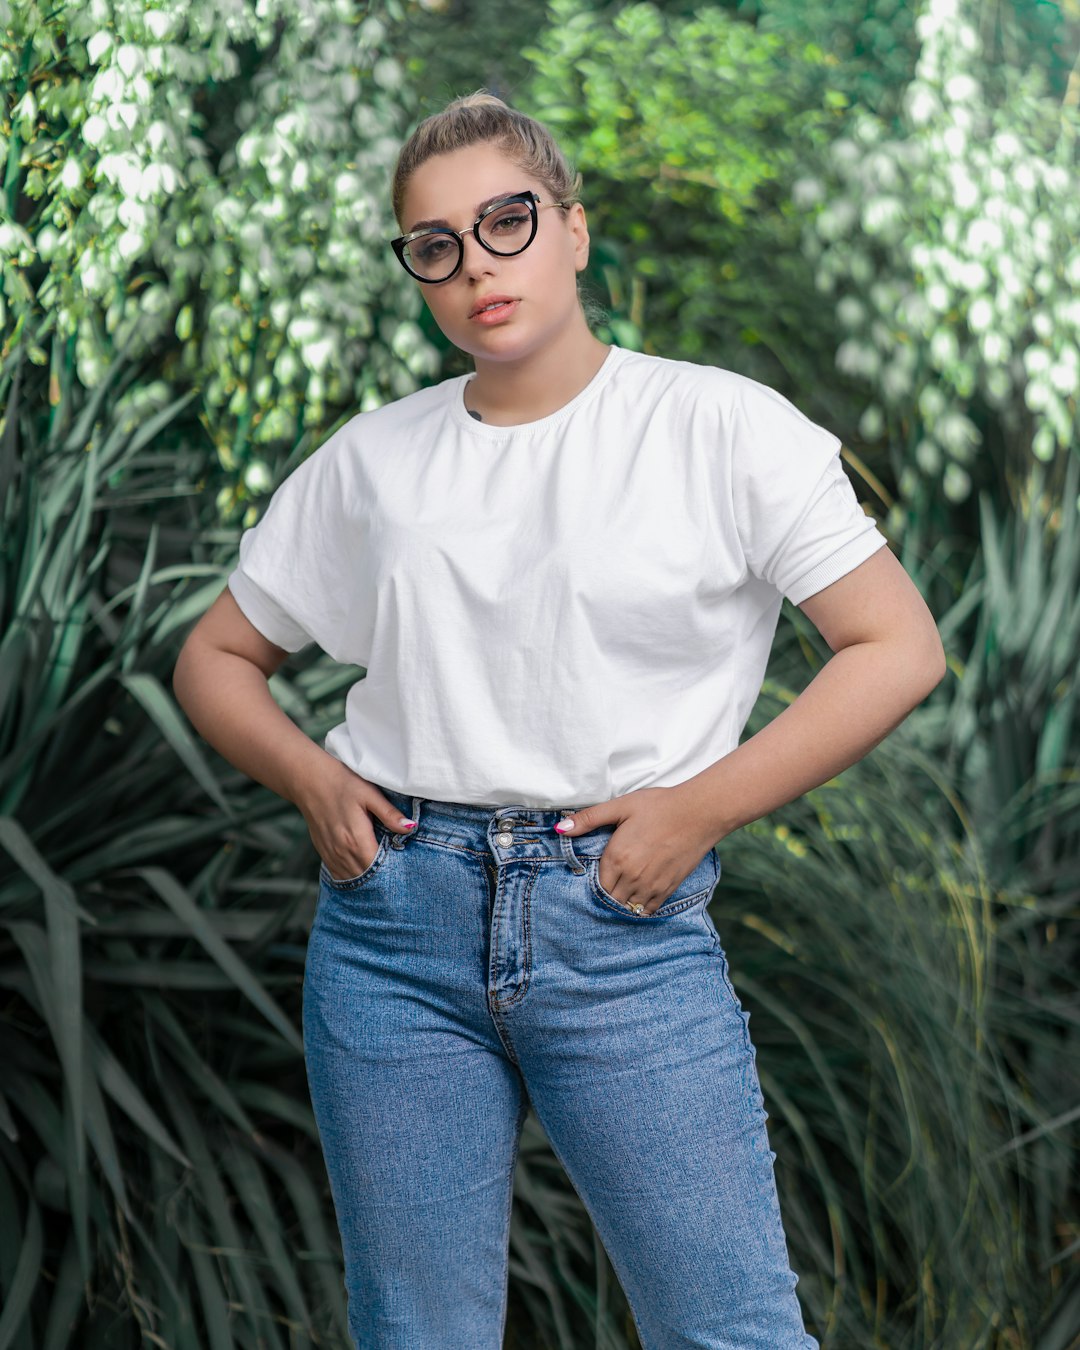 woman in white crew neck t-shirt and blue denim jeans standing near green plants during